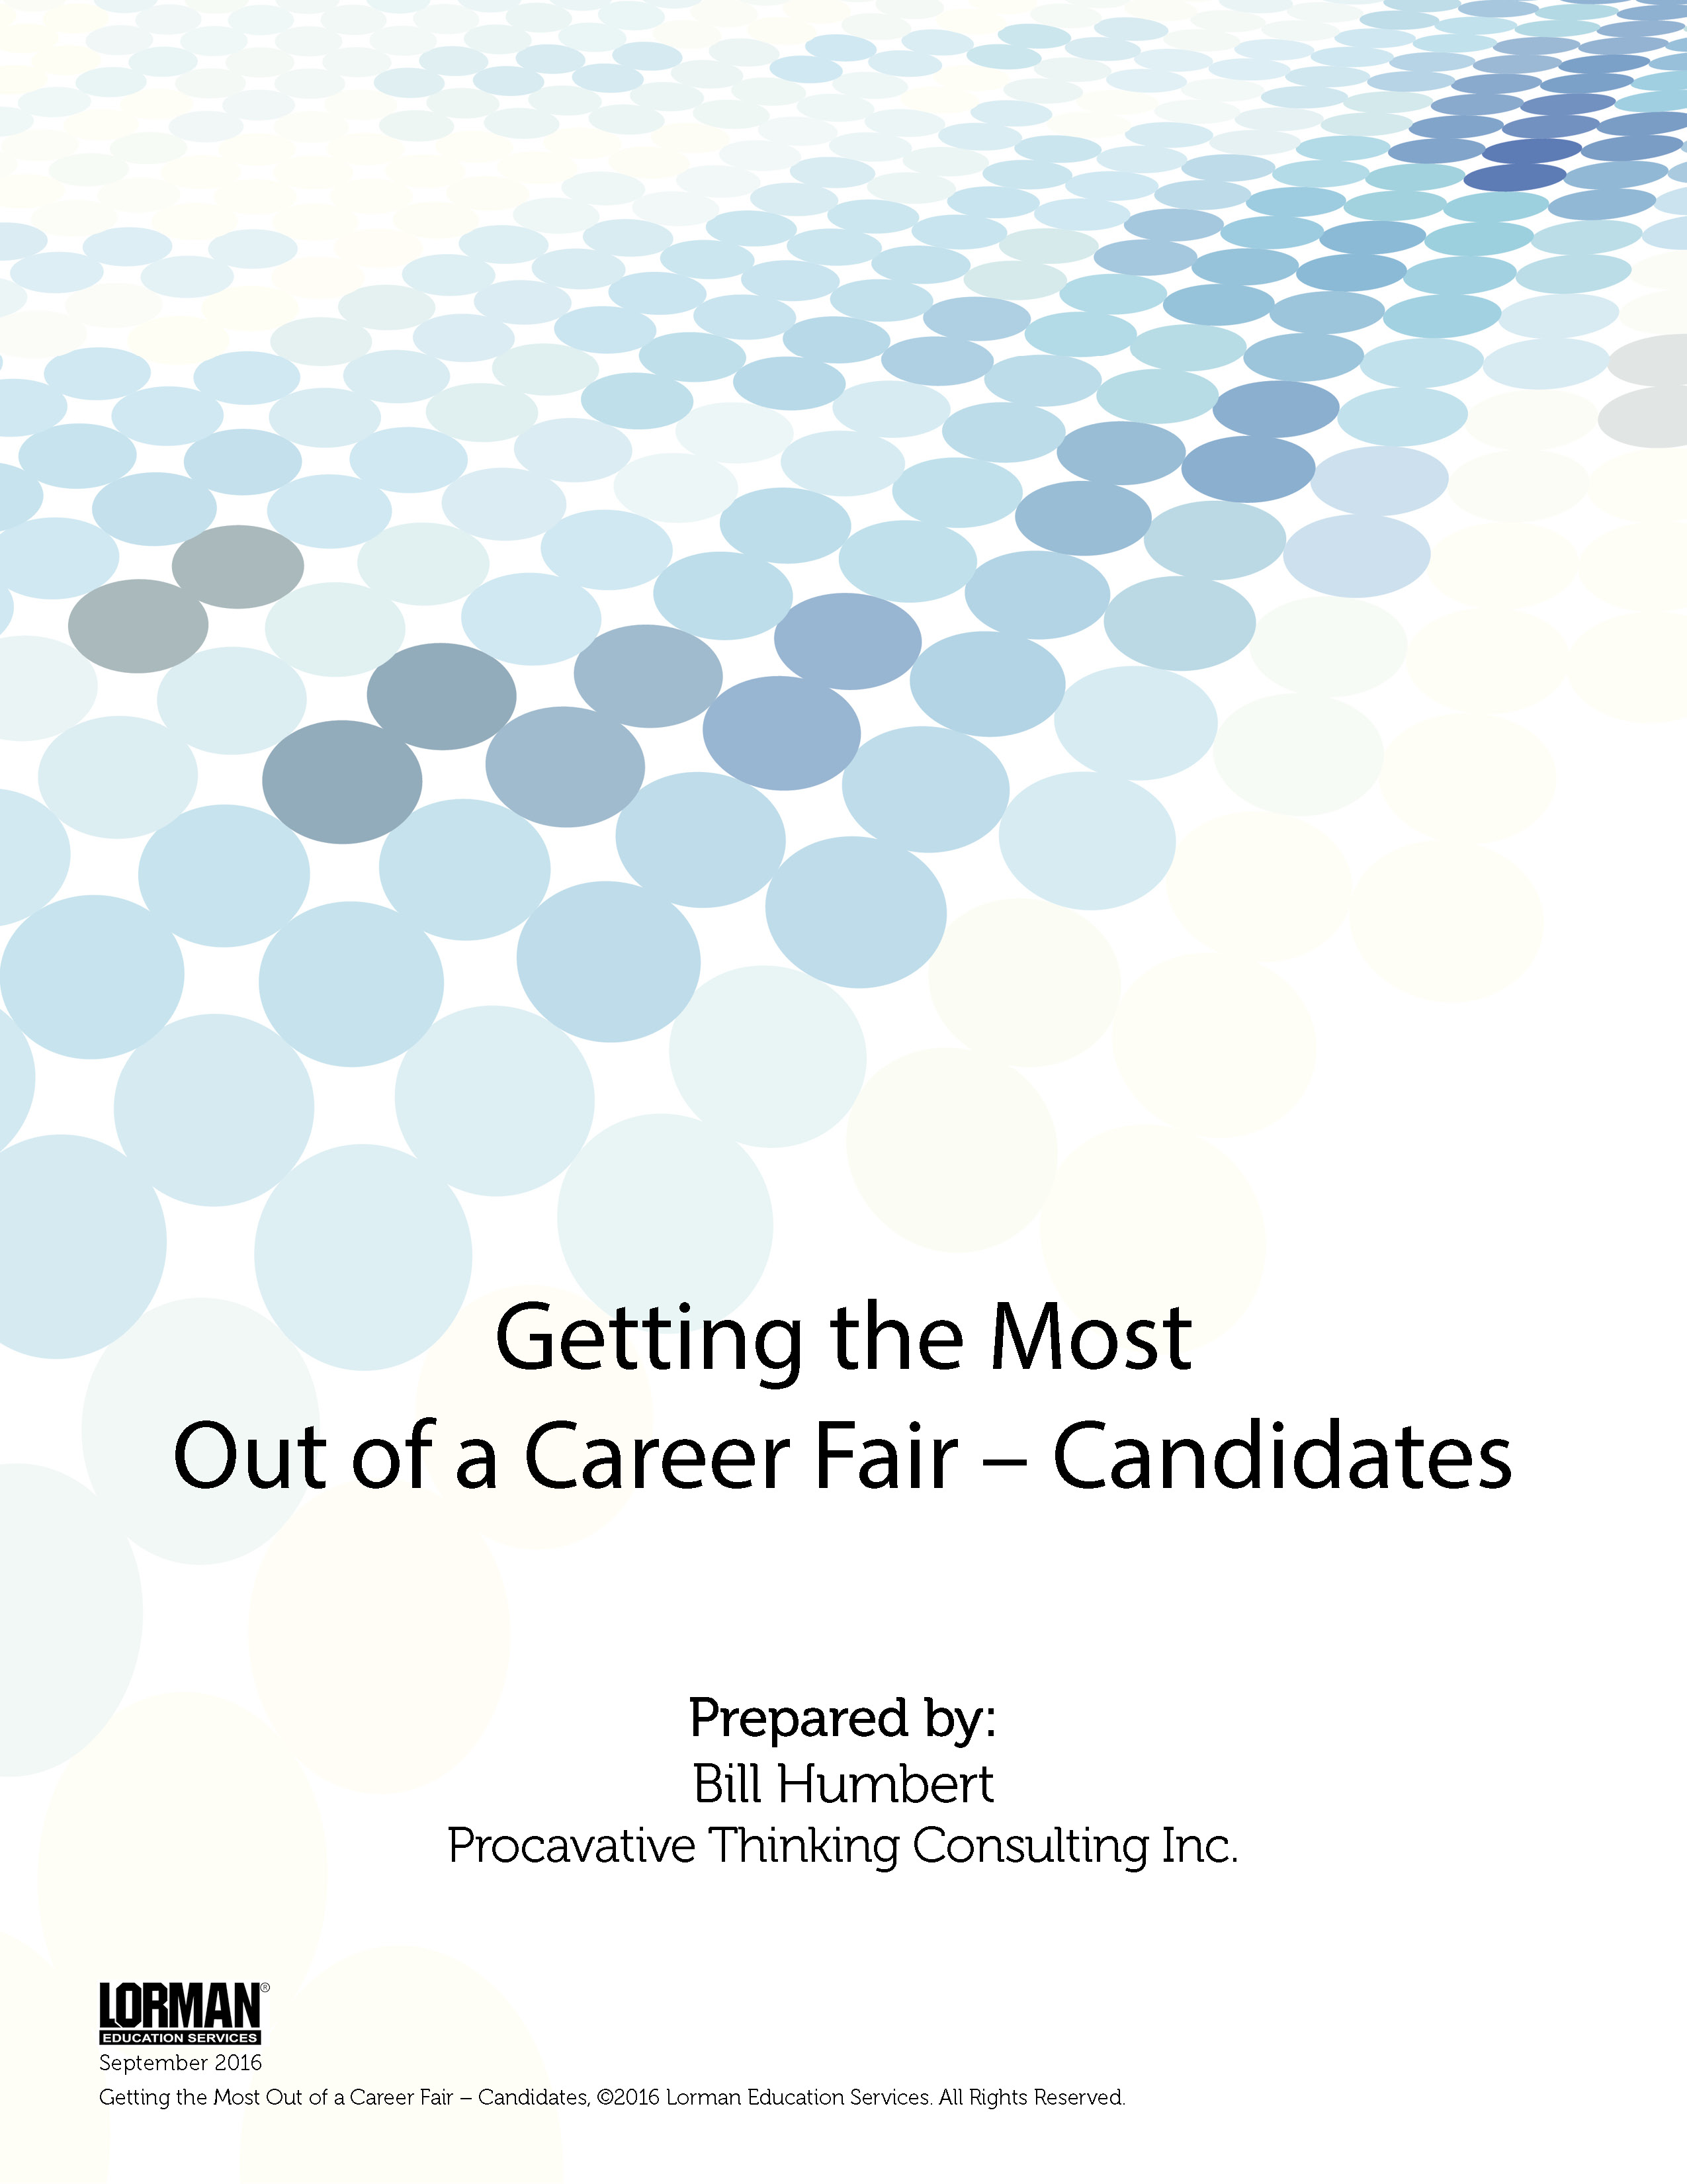 Getting the Most Out of a Career Fair - Candidates